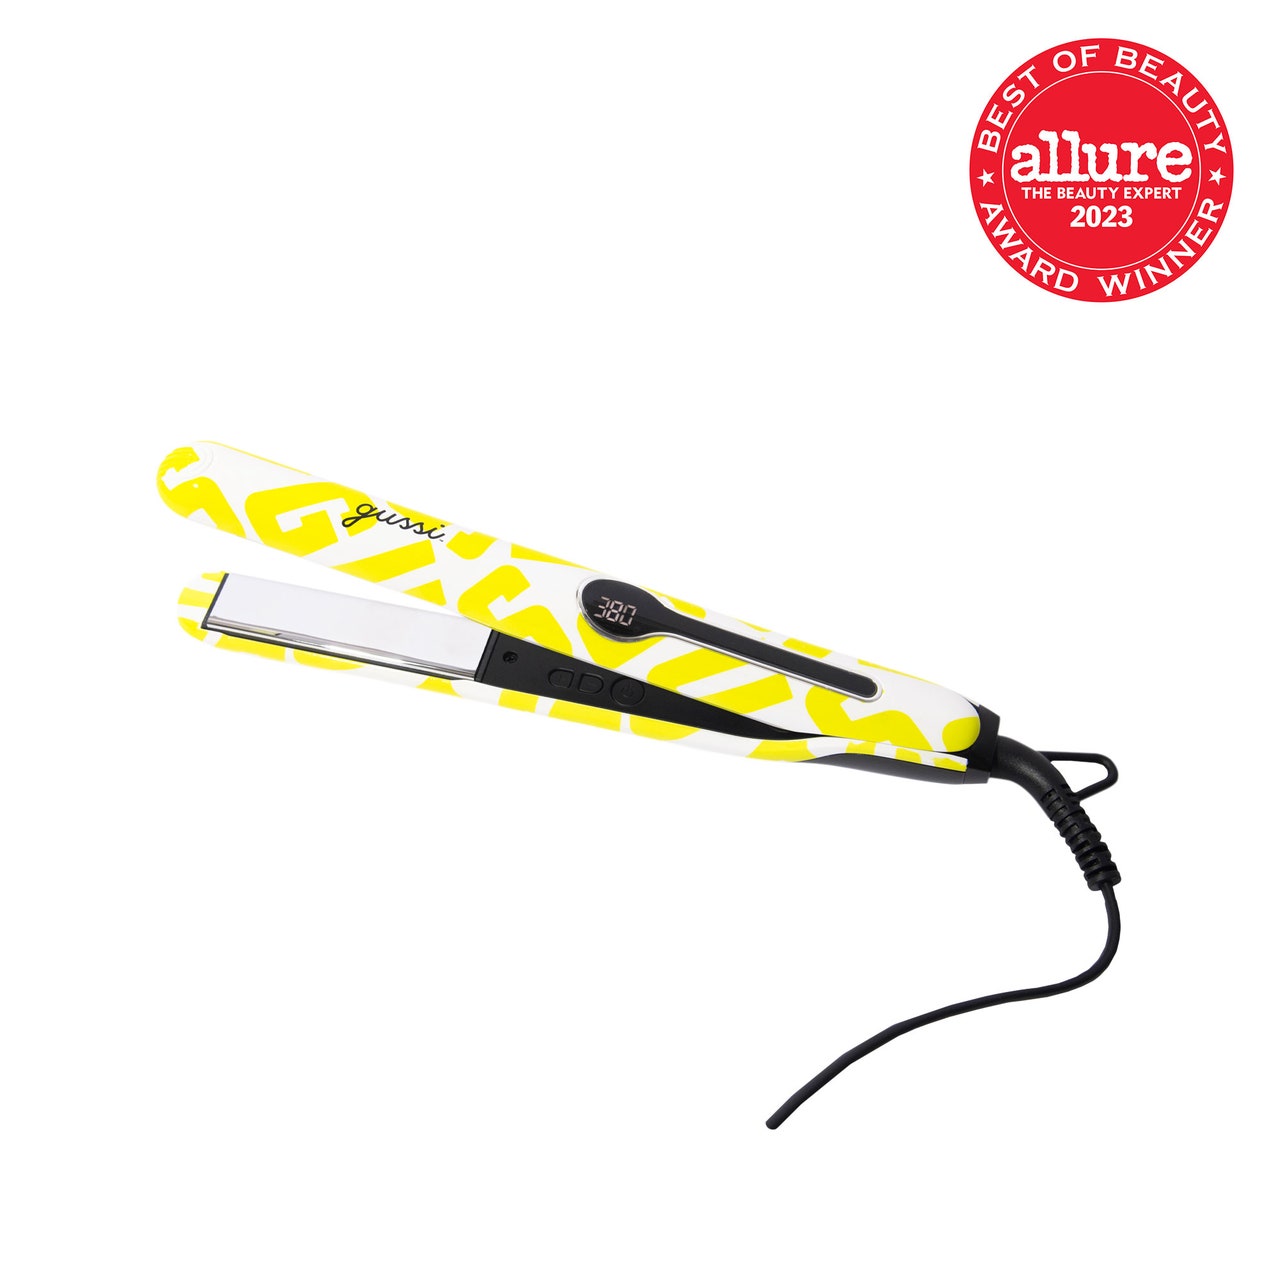 Gussi Mane Squeeze 1" Titanium & Ceramic Flat Iron white and neon yellow flat iron on white background with red Allure BoB seal in the top right corner